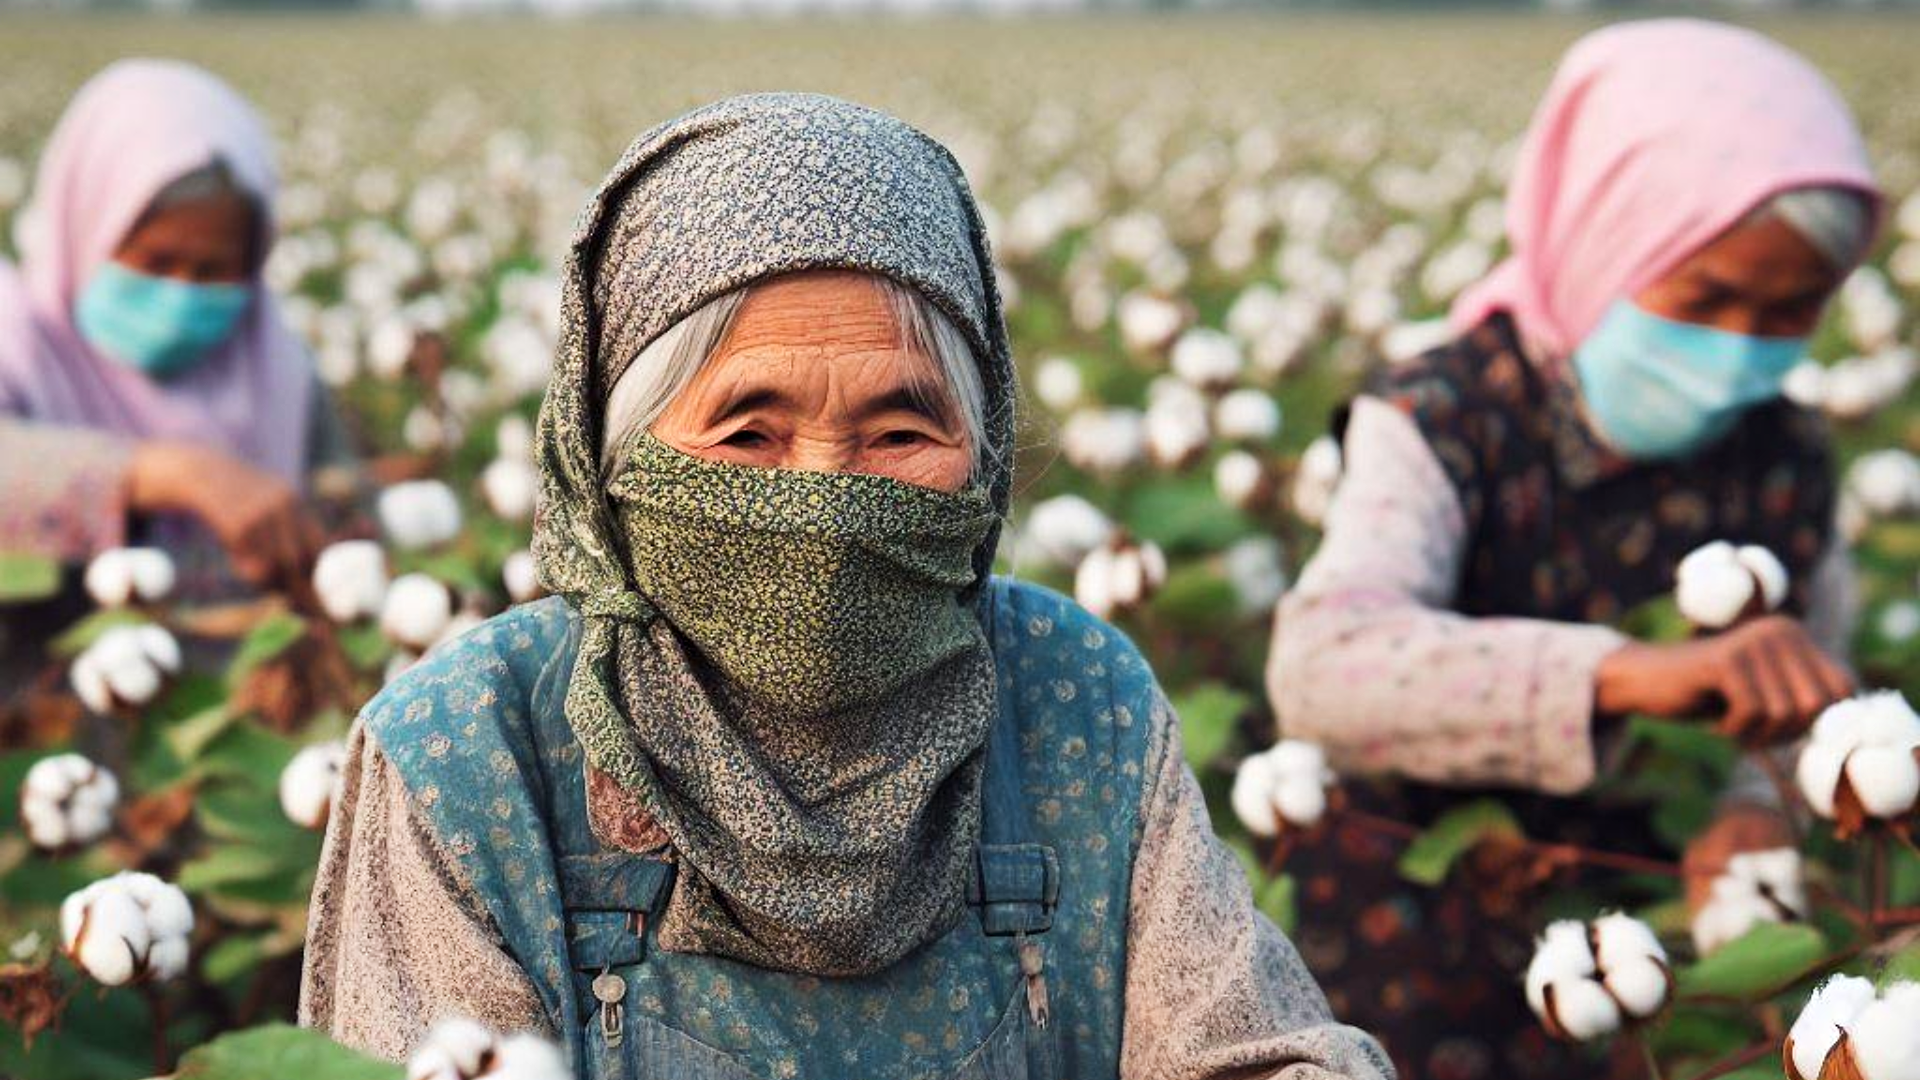 Carbon credits potentially linked to Uyghur forced labour